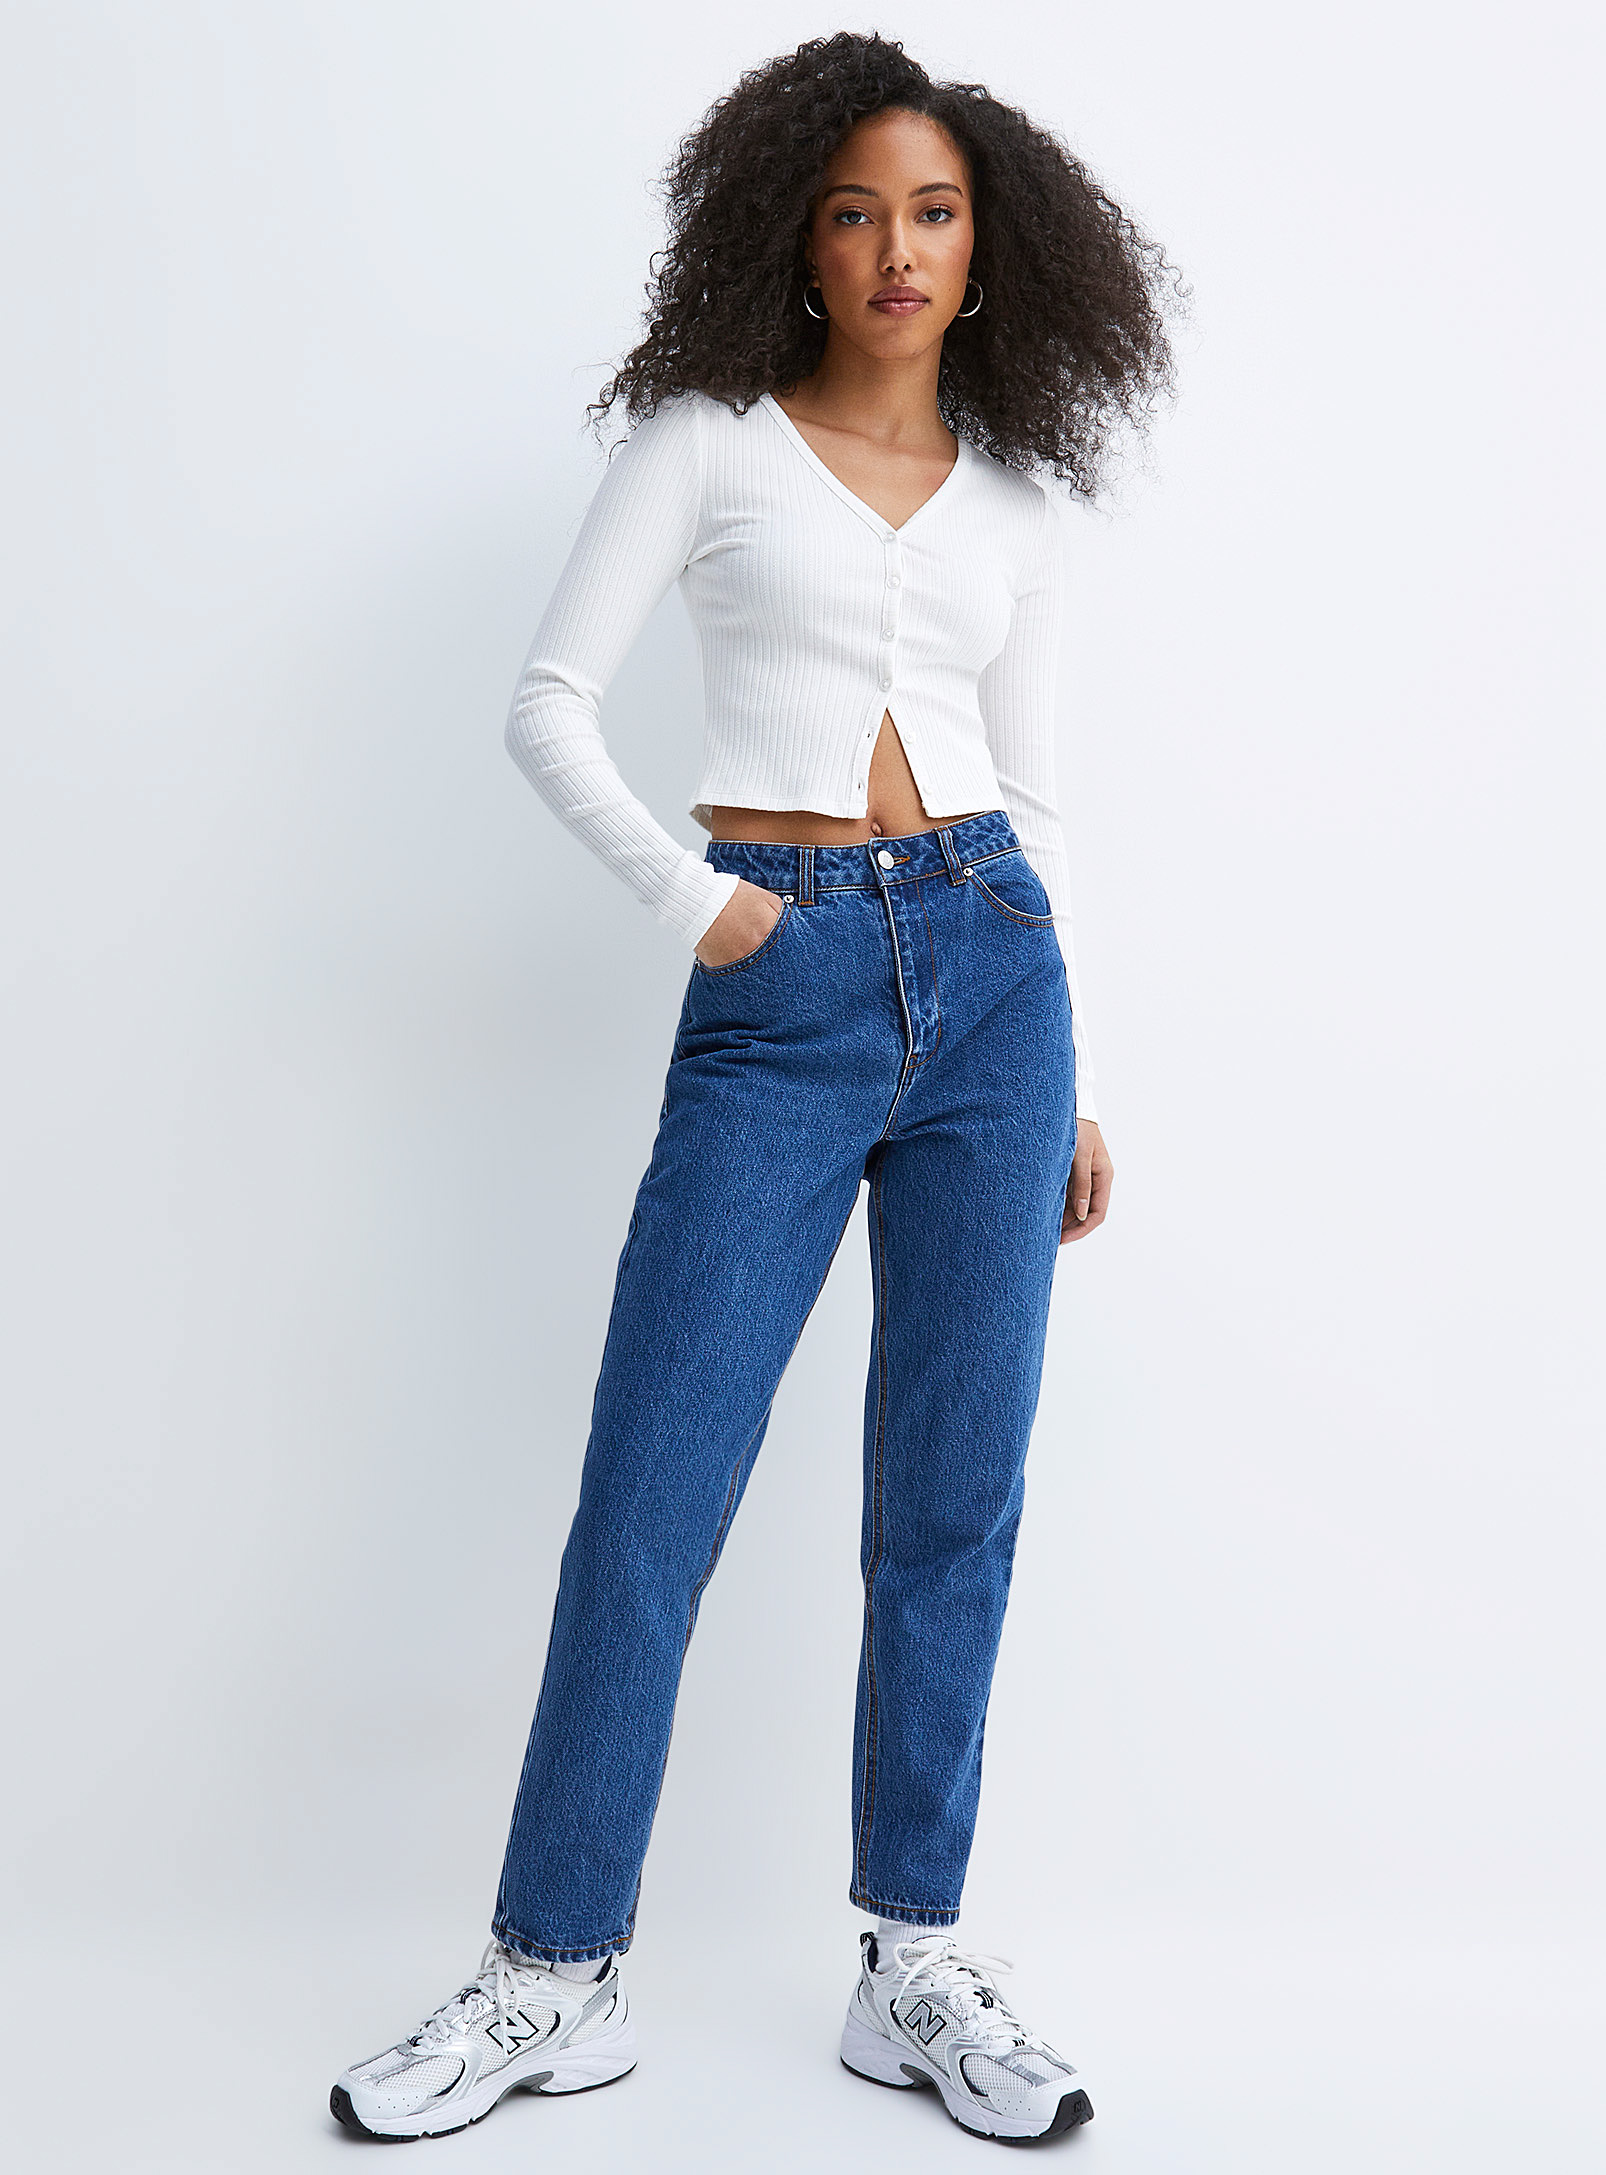 Twik Recycled Cotton Vintage Mom Jean Old School Fit In Sapphire Blue